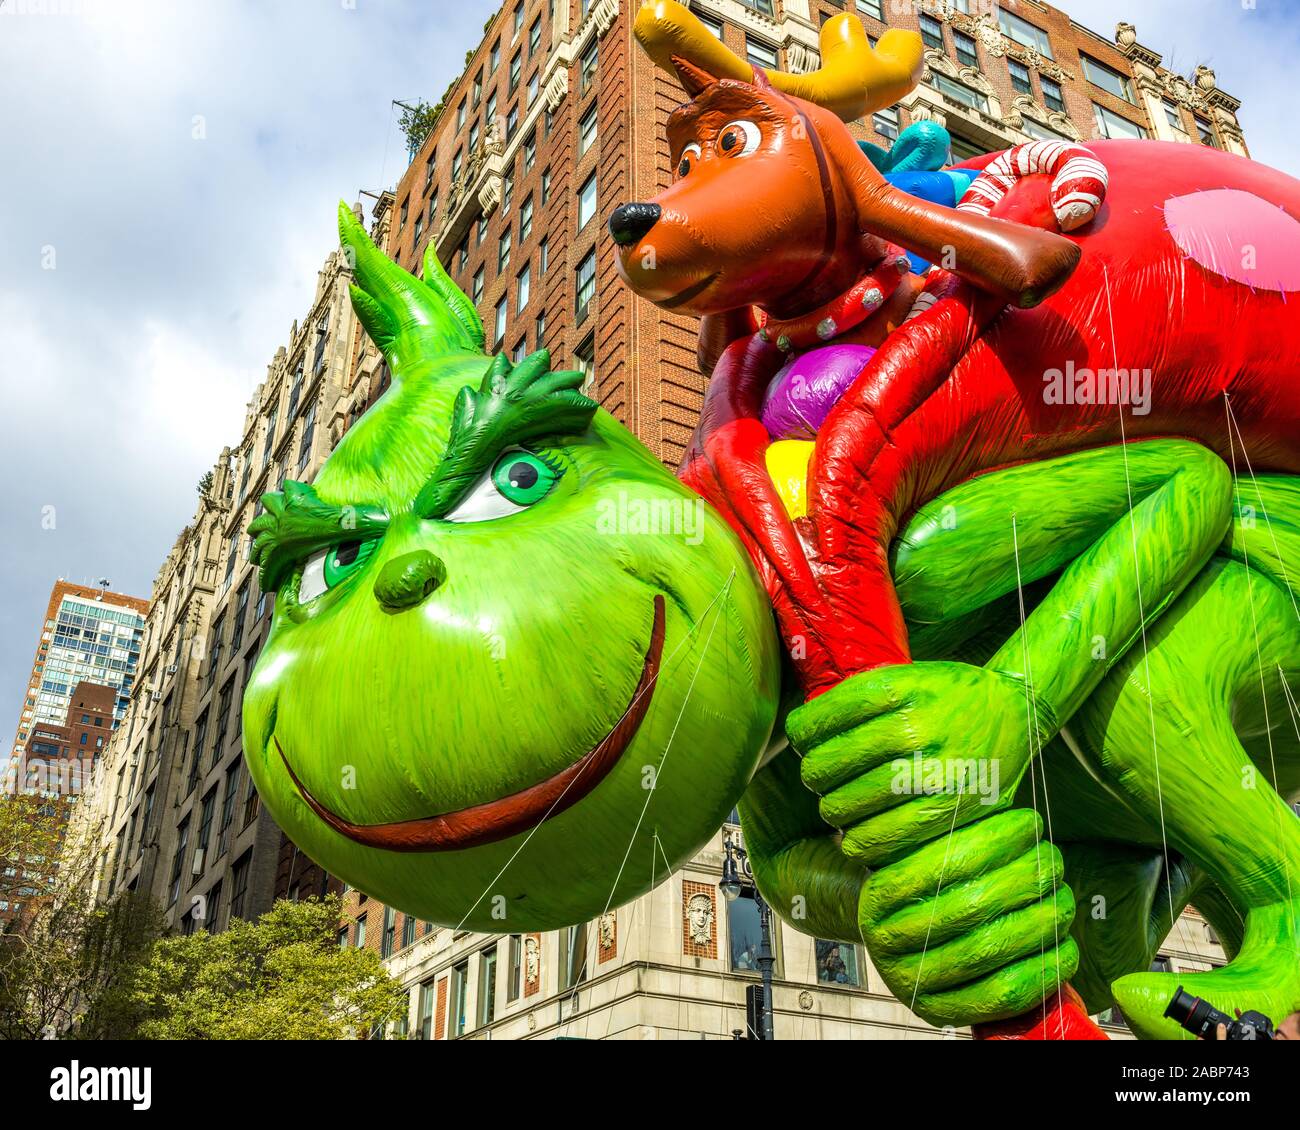 New York, USA. 28th Nov, 2019. Dr. Seuss' The Grinch 'Illumination' balloon makes its way through Central Park West during the Macy's Thanksgiving Parade in New York City. Credit: Enrique Shore/Alamy Live News Stock Photo